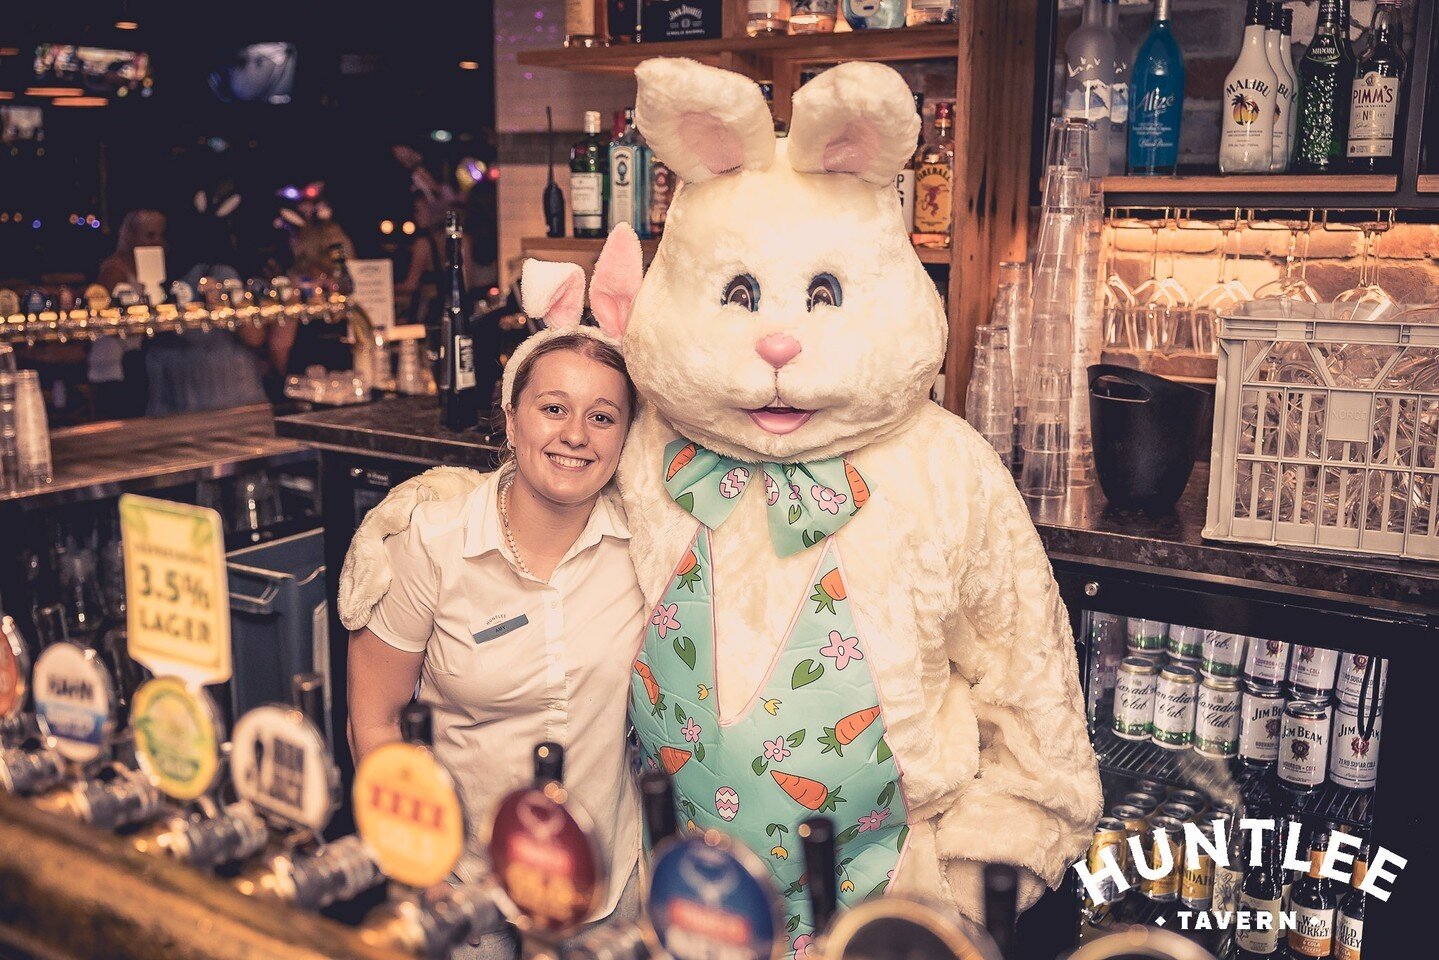 🐰🌟 Easter Week at Huntlee Tavern! 🌟🐰

🍽️ Tonight: Kids eat free! Plus, a complimentary drink with every main meal.
🎧 Thursday: DJ Angelo &amp; DJ Fusion from 9 pm.
🎸 Easter Saturday: Open 9 am - 1 am, with live music from Project X at 9 pm!
🥚